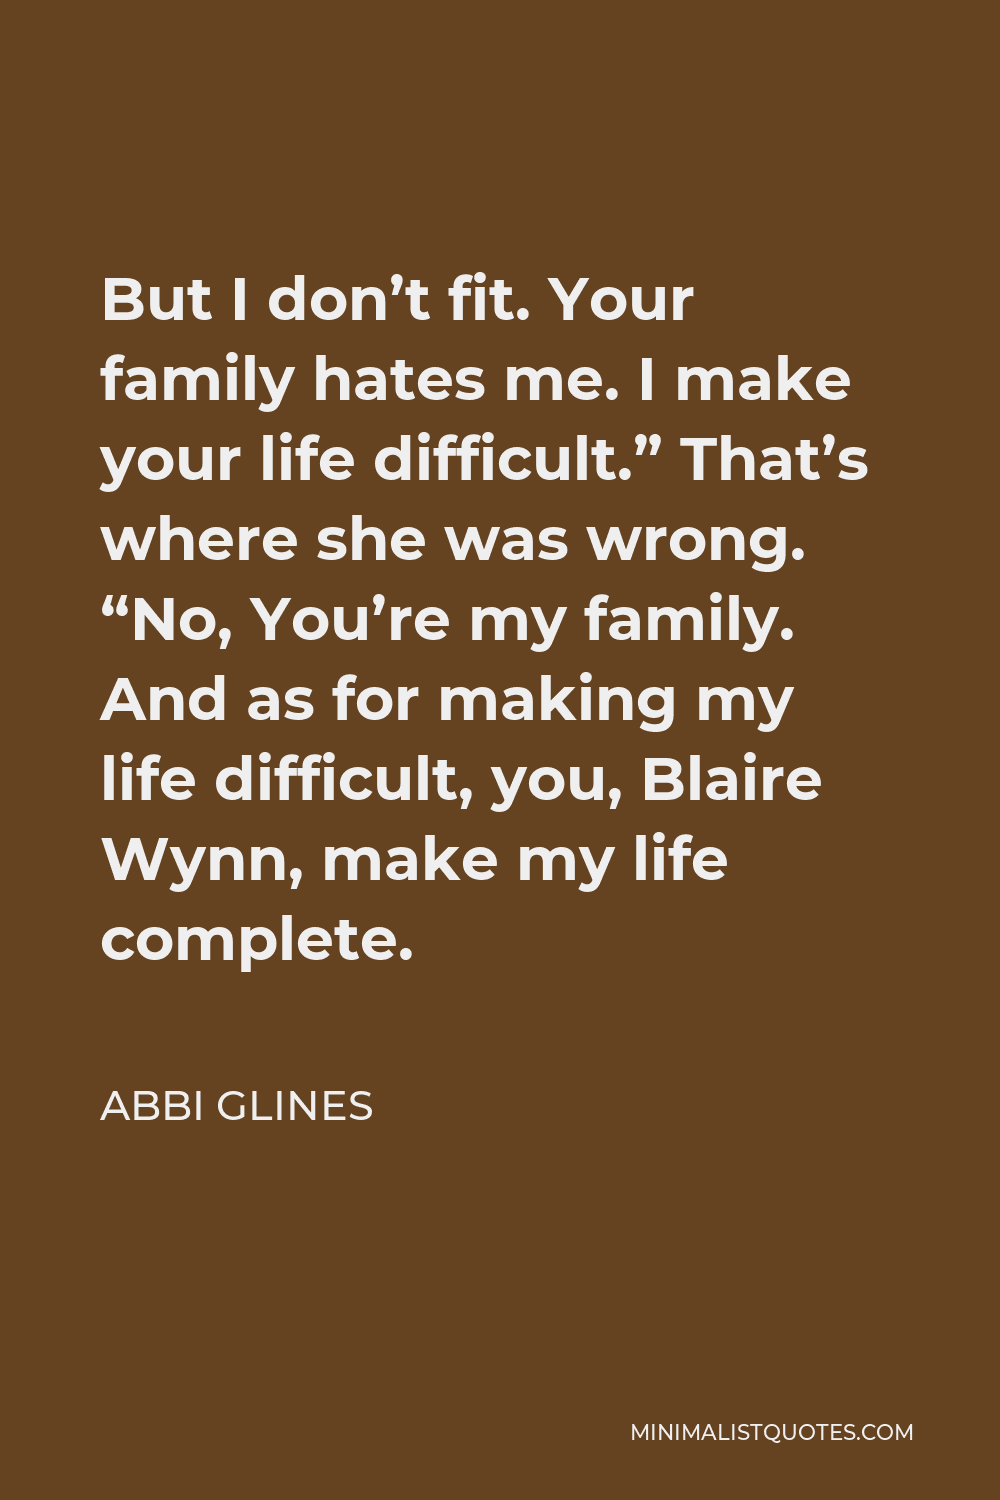 Abbi Glines Quote - But I don’t fit. Your family hates me. I make your life difficult.” That’s where she was wrong. “No, You’re my family. And as for making my life difficult, you, Blaire Wynn, make my life complete.